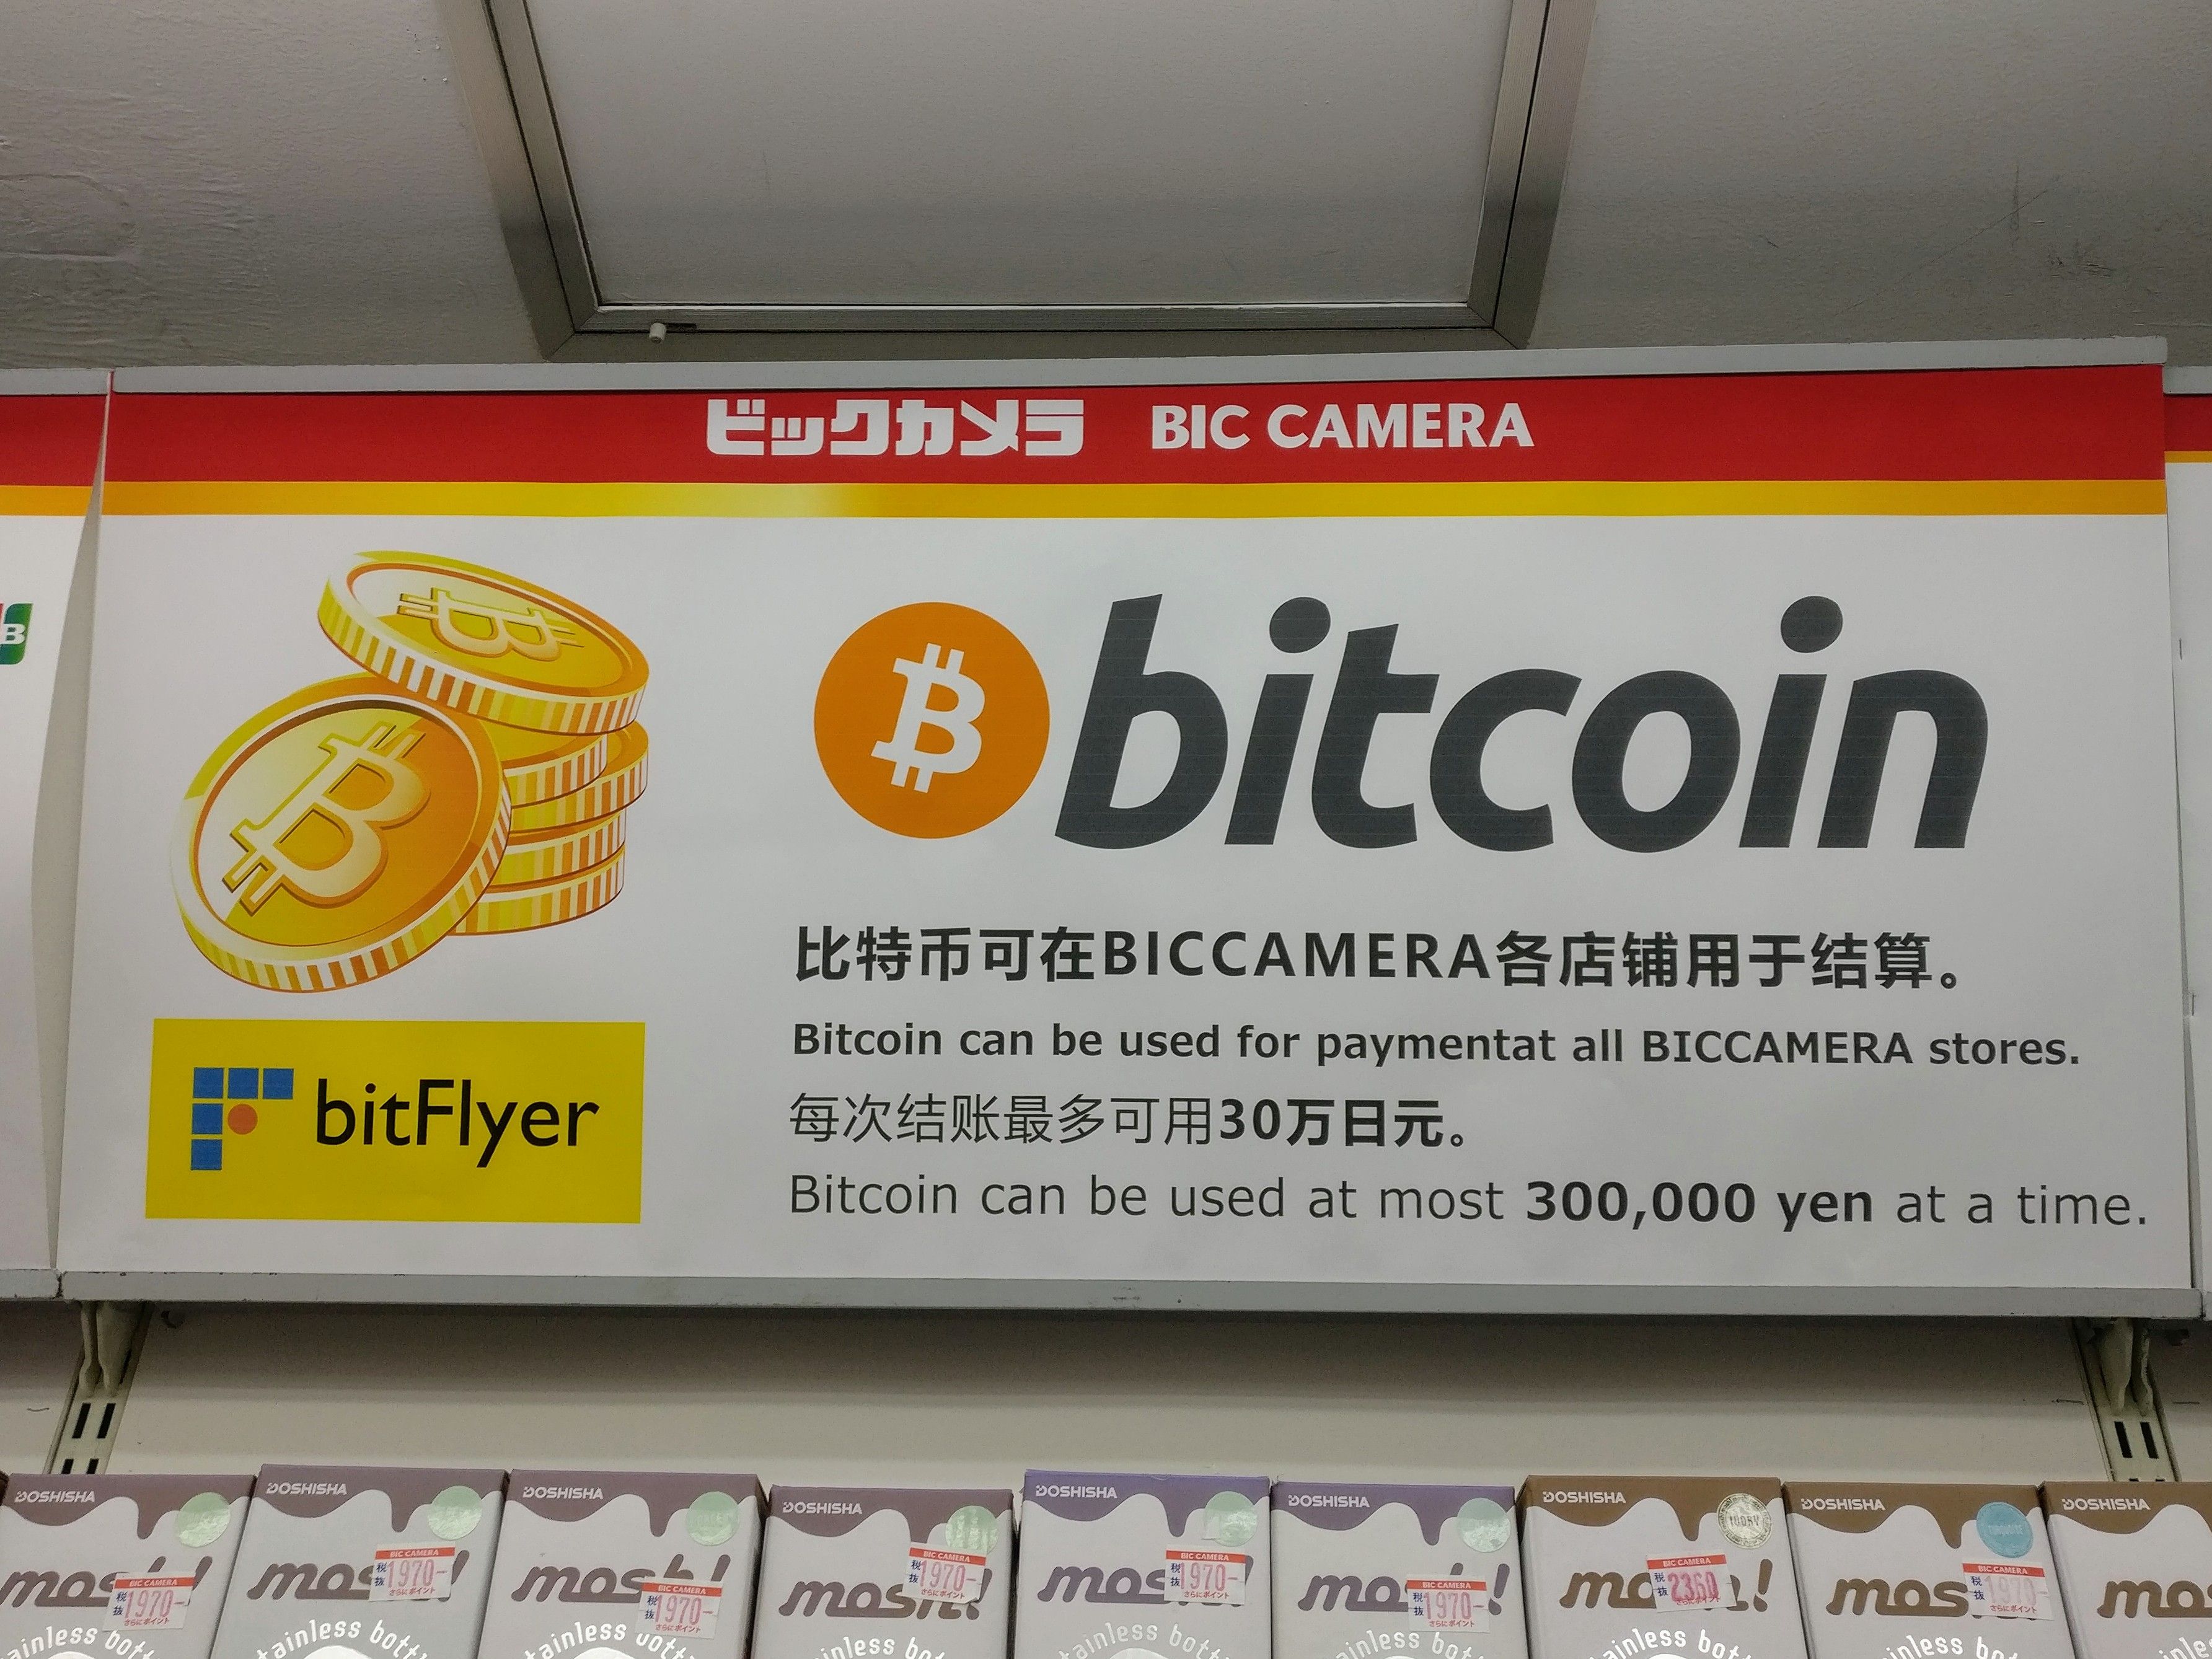 I don't want to spend Bitcoin in a store that accepts Bitcoin 讽刺的比特币